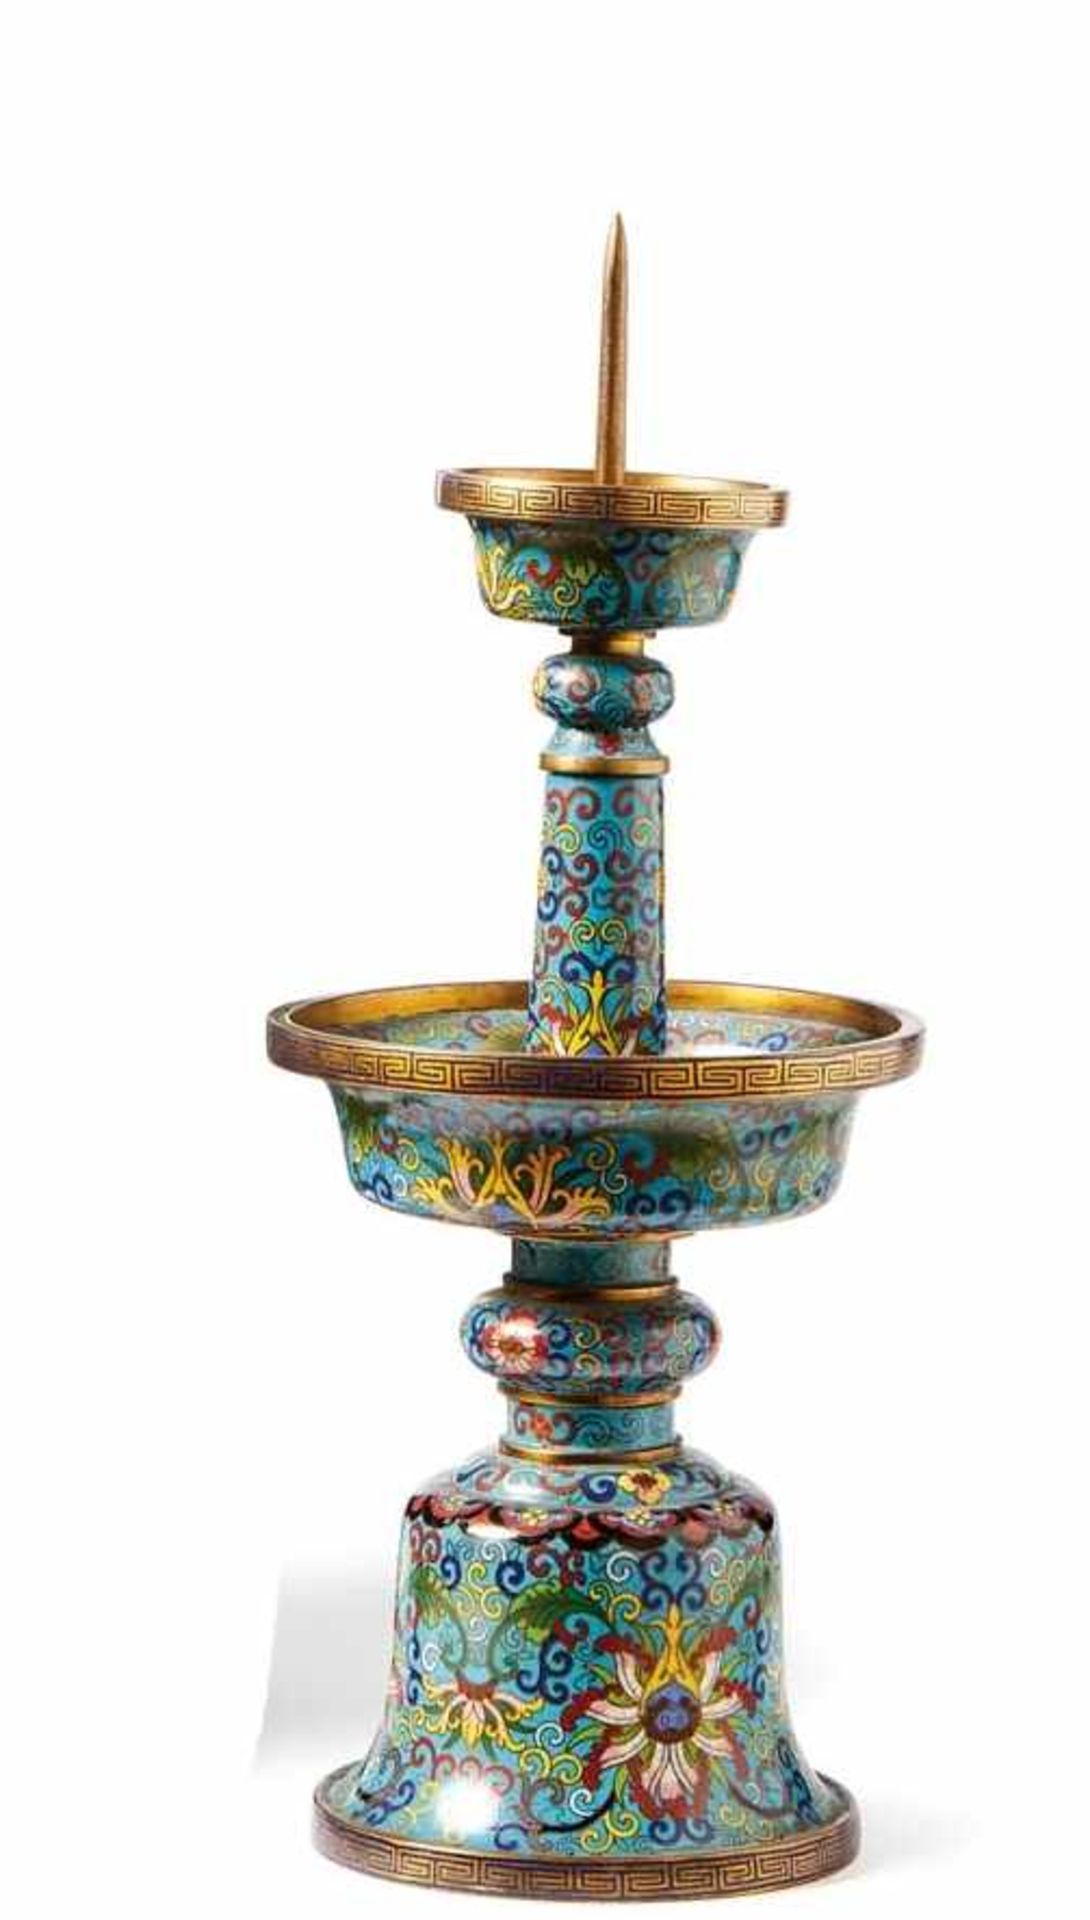 Large candlestickChina, Qing Dynasty - 19th c.Bell-shaped base with baluster shaft and two eaves